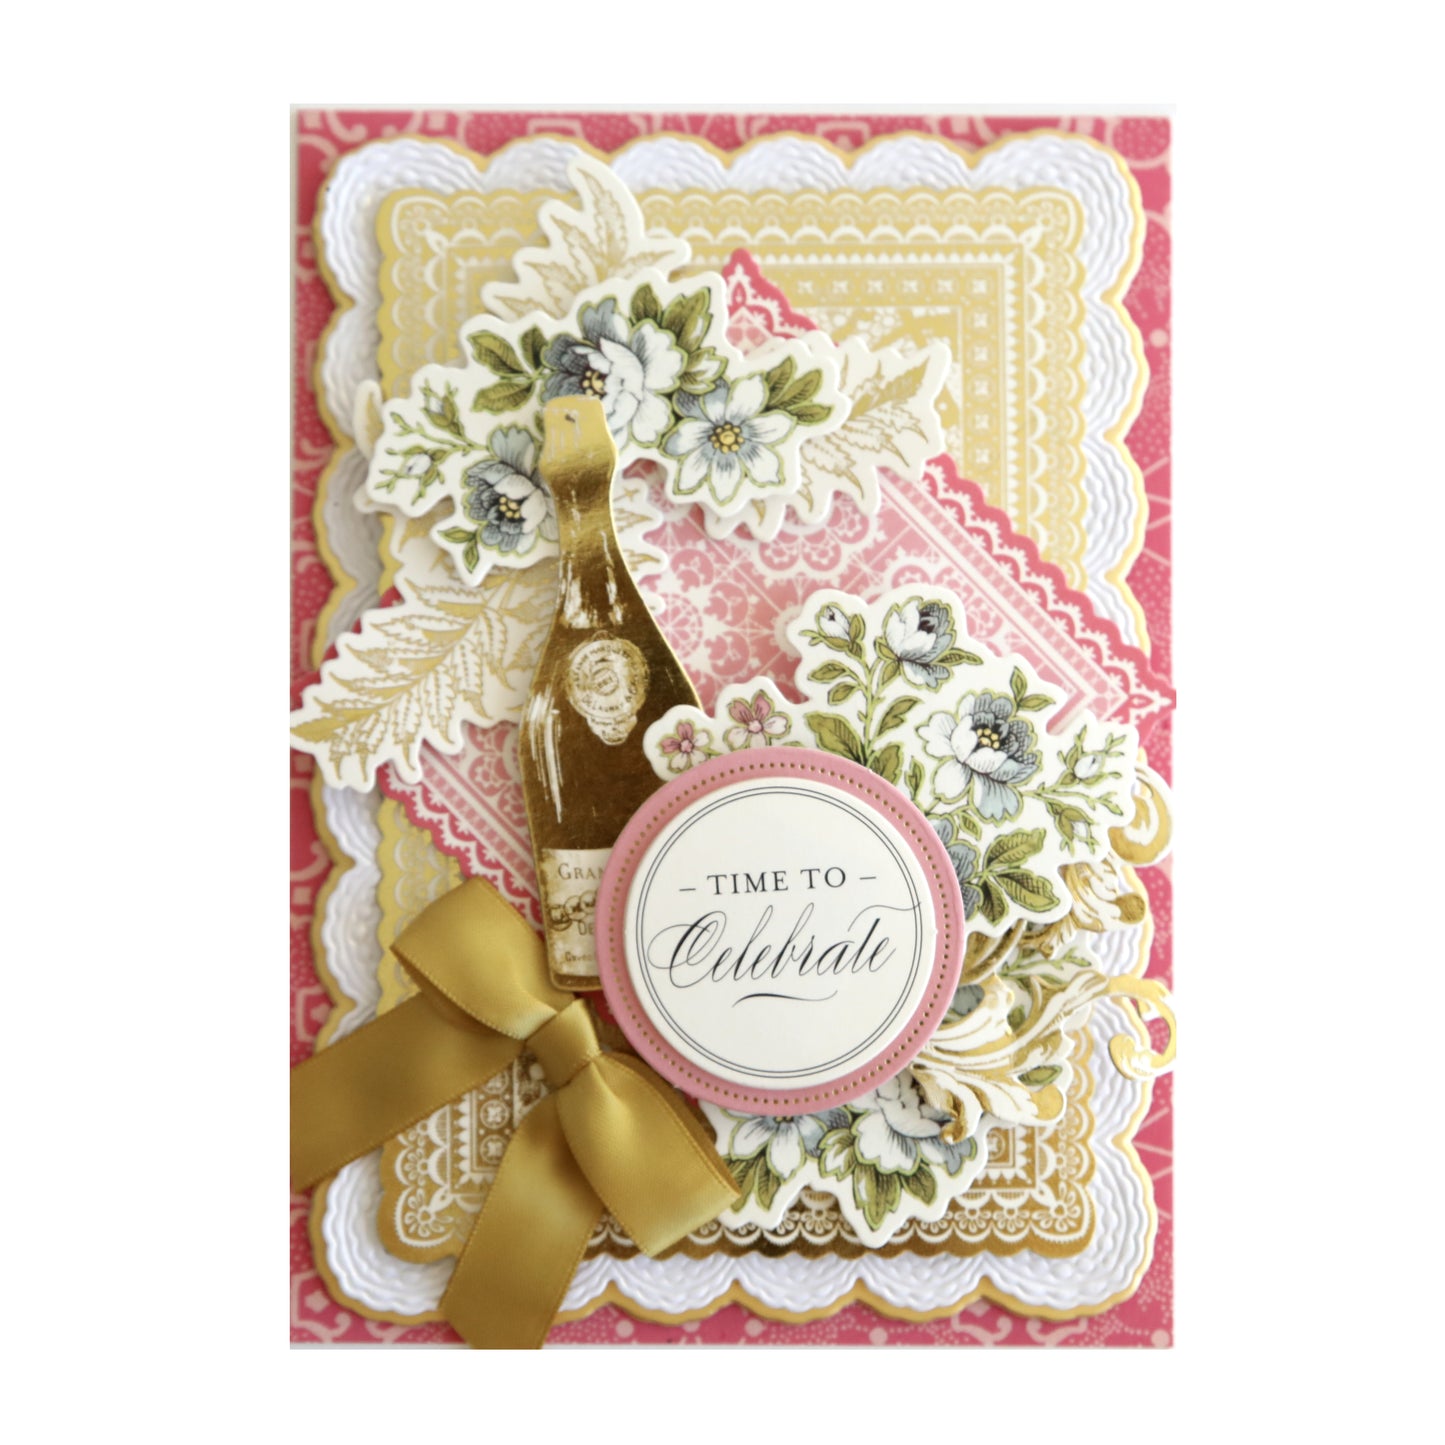 A vintage-inspired Valentine's card featuring a pink and gold color scheme and adorned with dimensional and texture-rich Lace Doily Embellishments.